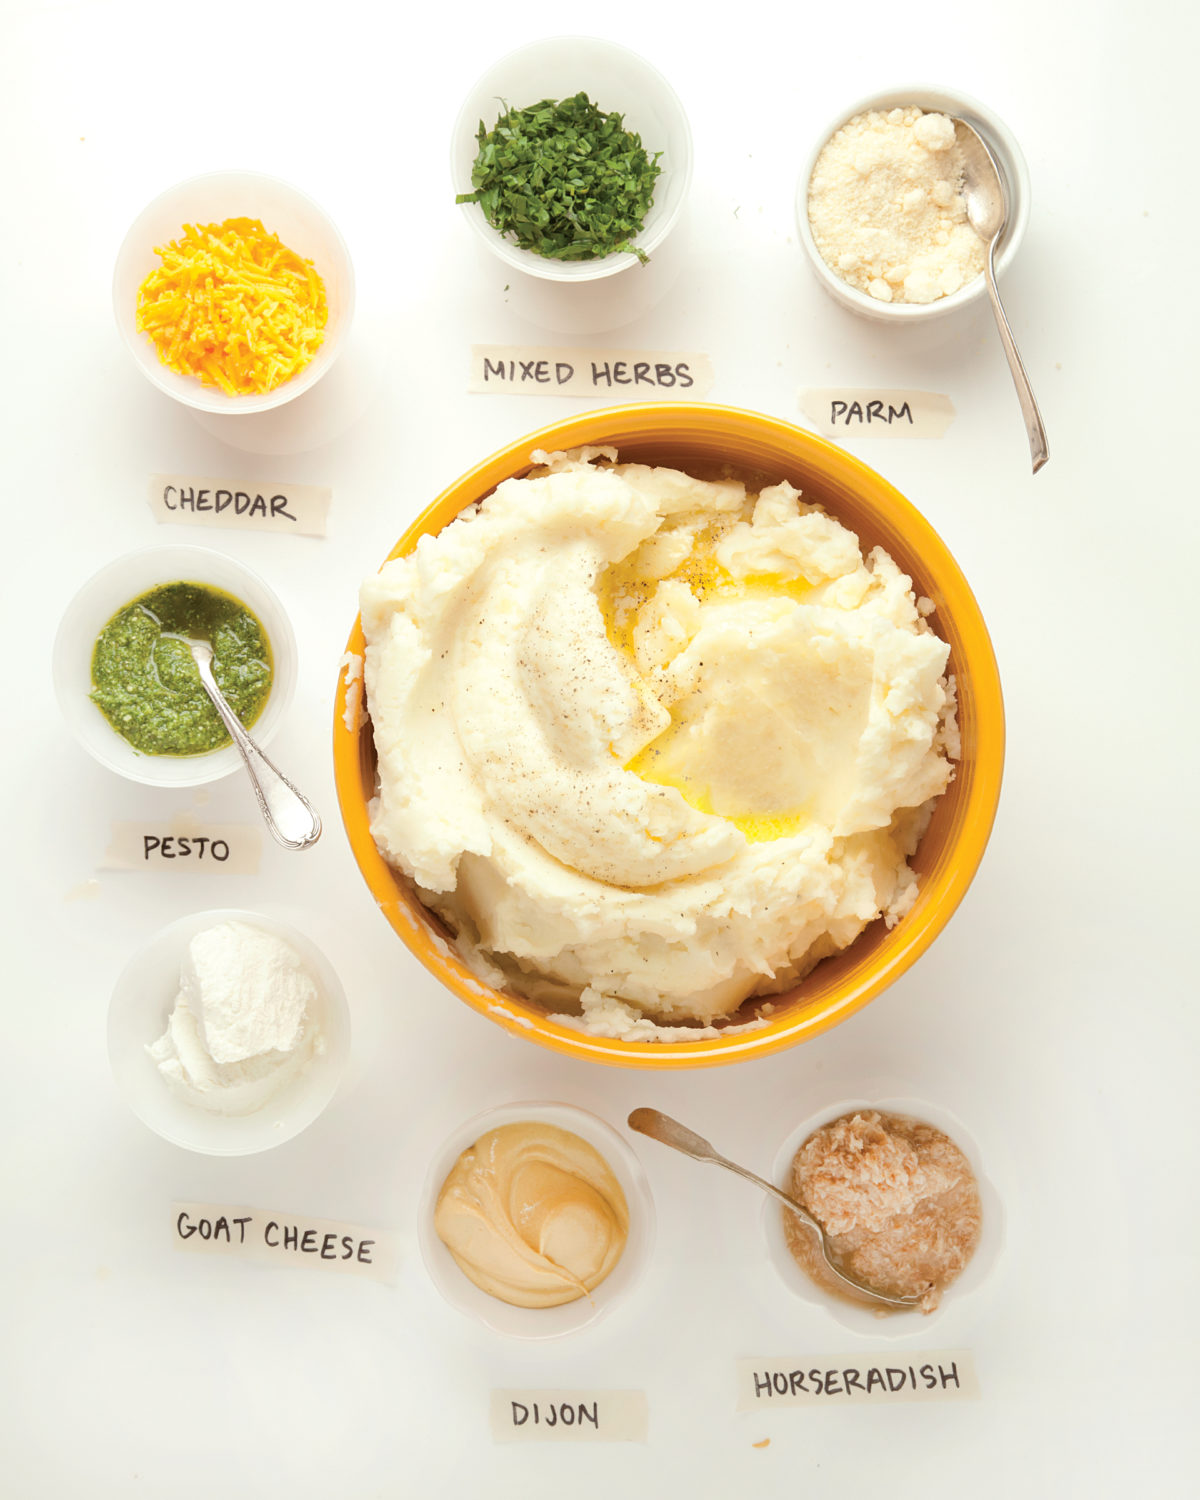 Bowl of Mashed Potatoes surrounded by containers of toppings including pesto, cheddar, and goat cheese.